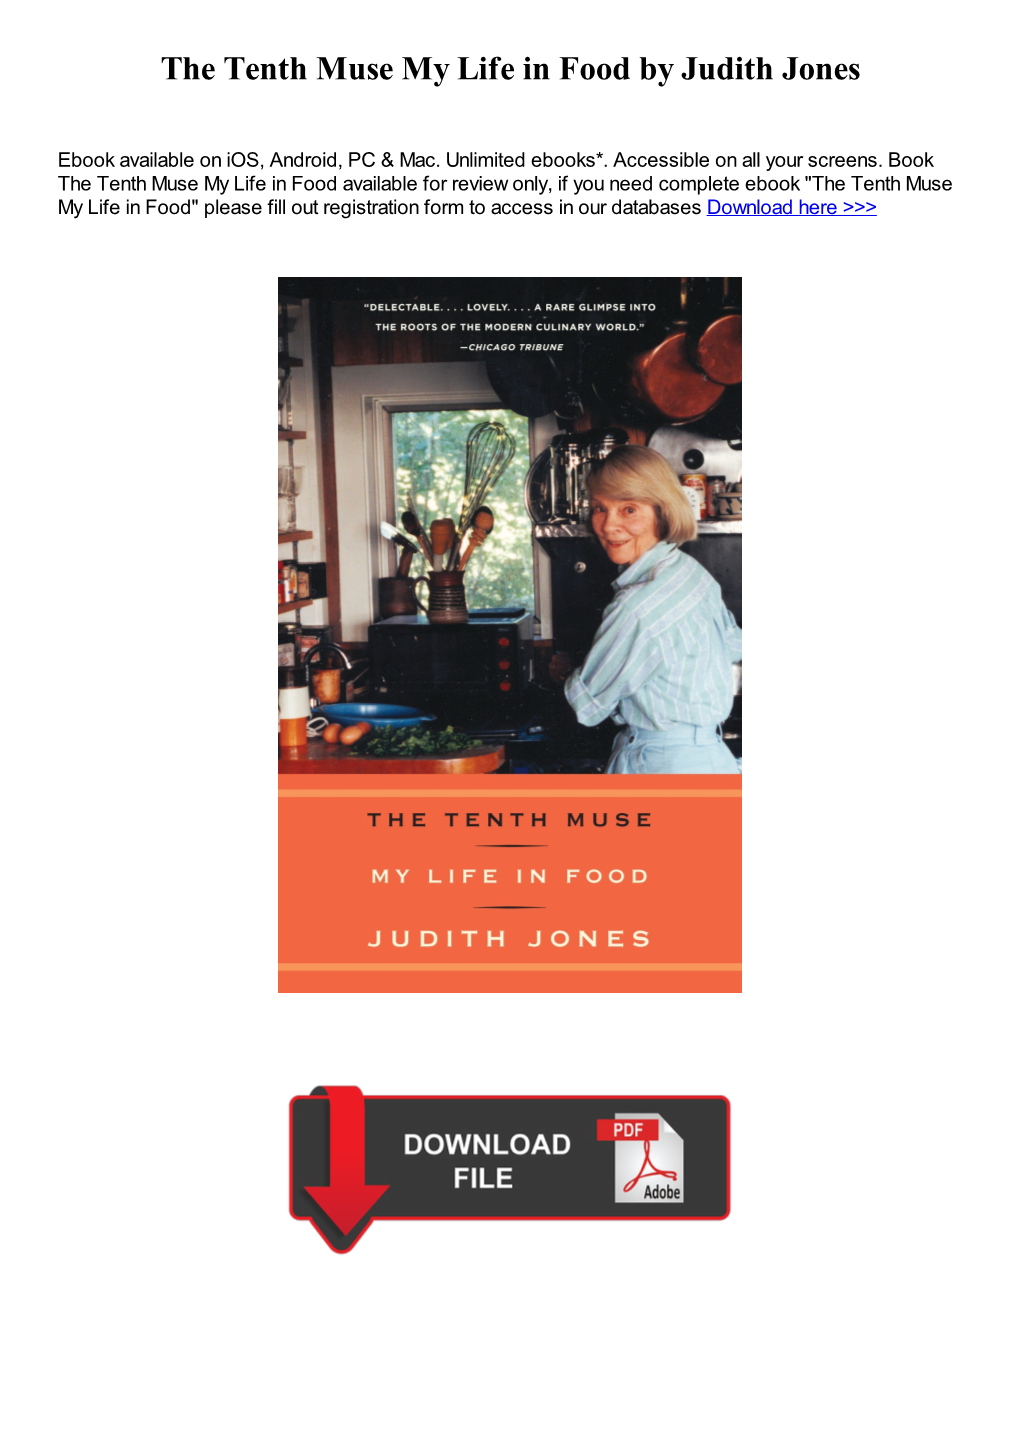 The Tenth Muse My Life in Food by Judith Jones